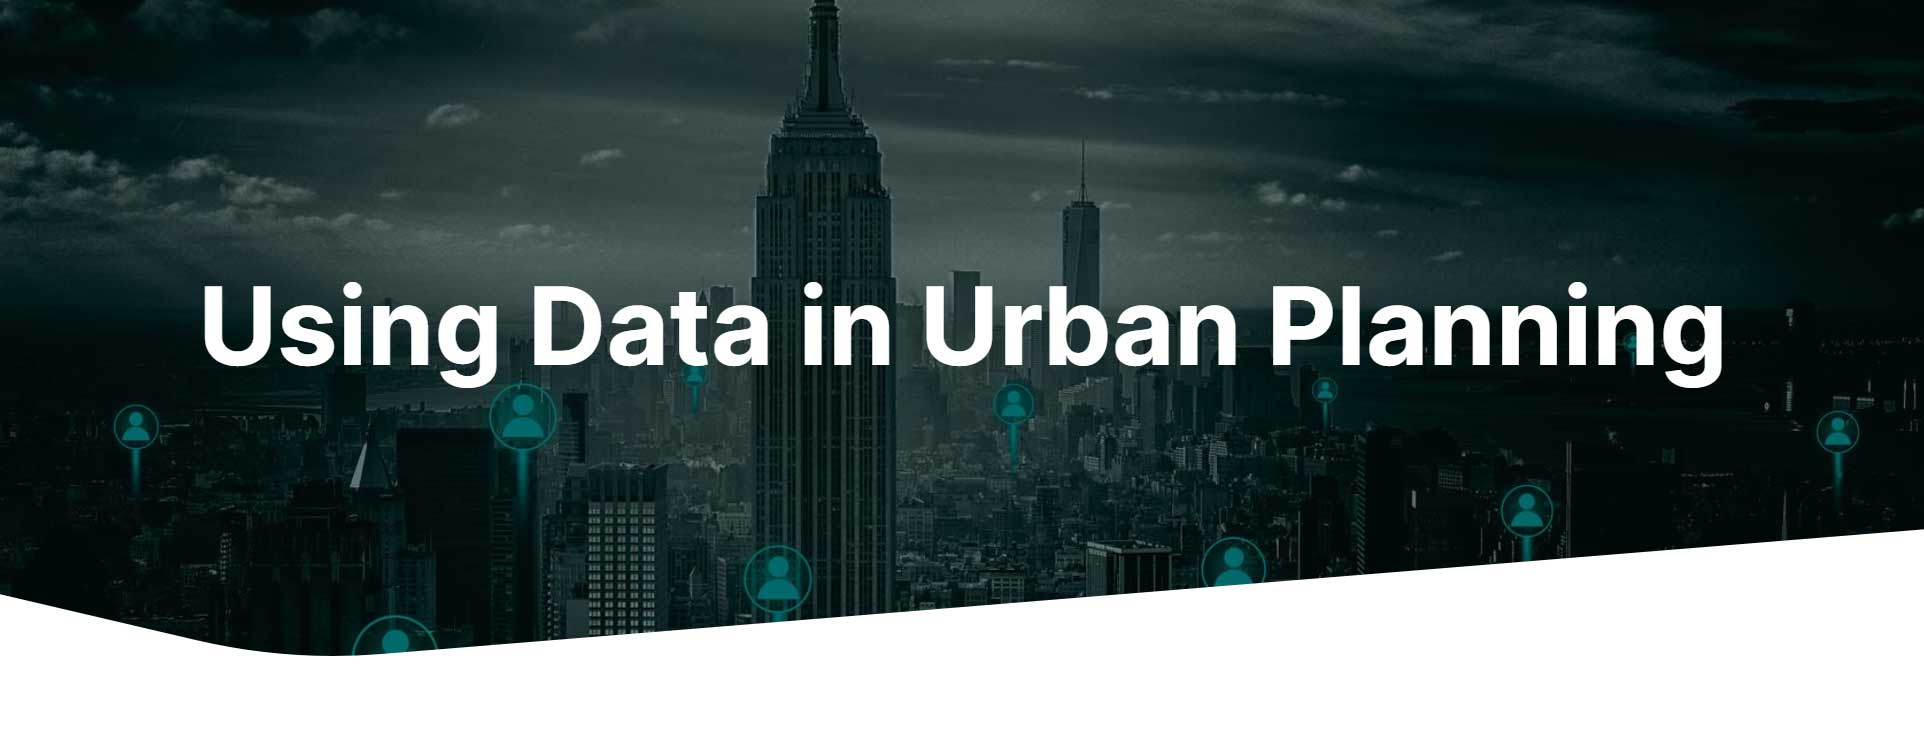 Using Data in Urban Planning Course